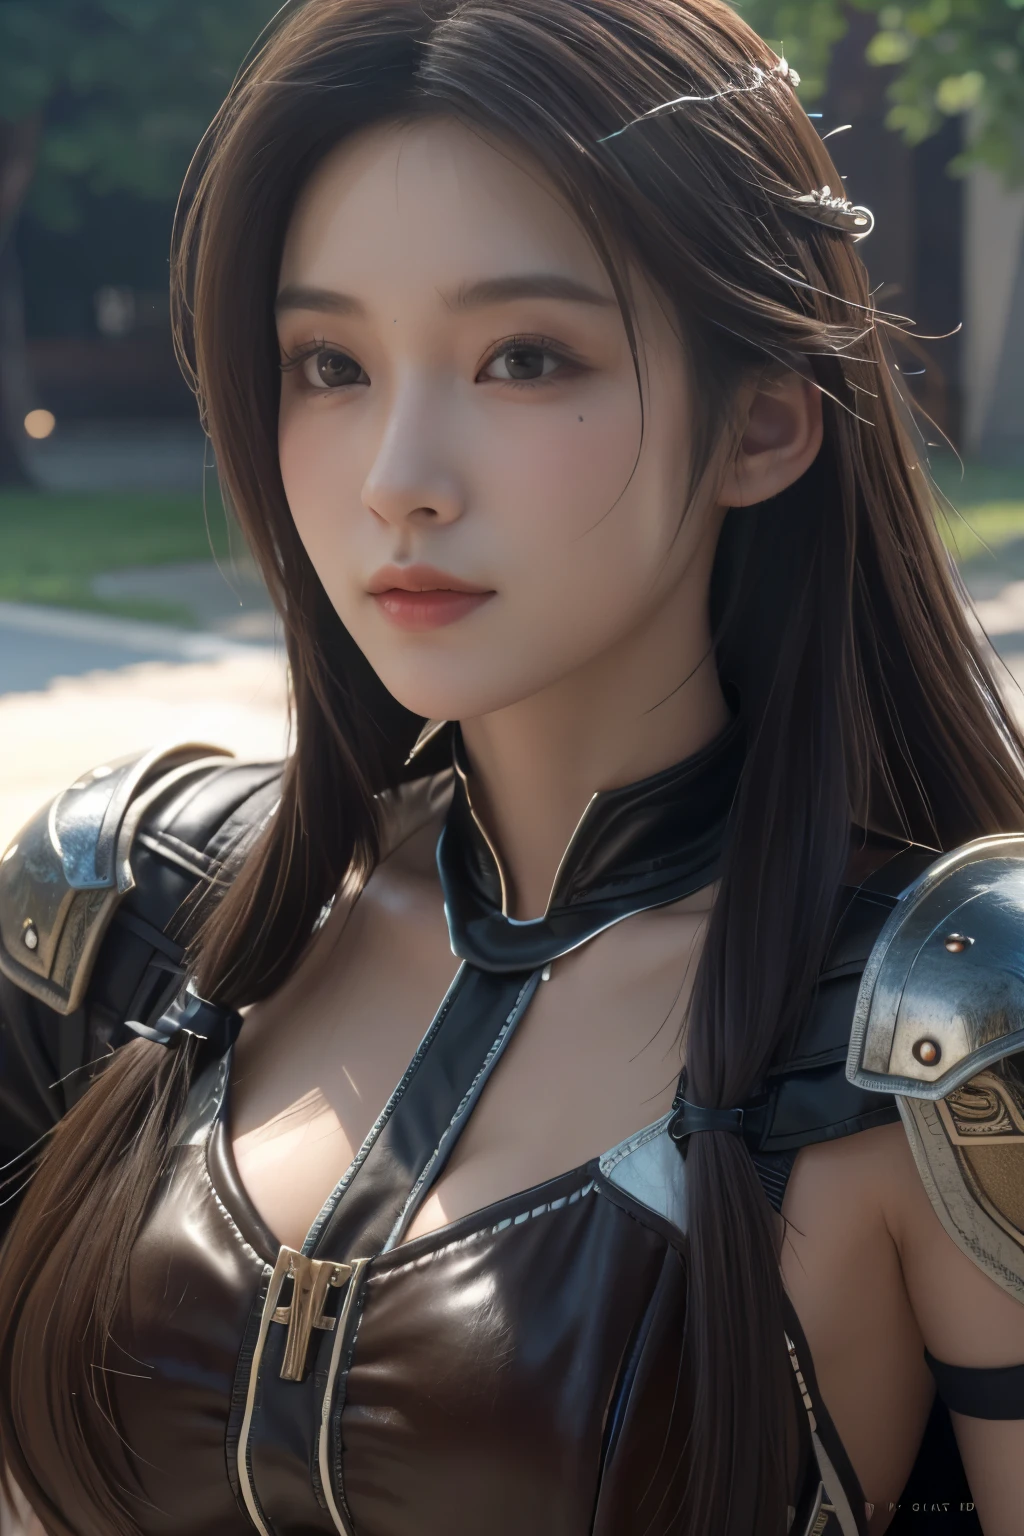 Game art，The best picture quality，Highest resolution，8K，(A bust photograph)，(Portrait)，(Head close-up)，(Rule of thirds)，Unreal Engine 5 rendering works， (The Girl of the Future)，(Female Warrior)， 
20-year-old girl，((Hunter))，An eye rich in detail，(Big breasts)，Elegant and noble，indifferent，brave，
（Medieval-style fur combat clothing，Glowing magic lines，Animal skin clothing with rich detailedieval Lady Knight，Medieval ranger，
photo poses，simple background，Movie lights，Ray tracing，Game CG，((3D Unreal Engine))，OC rendering reflection pattern